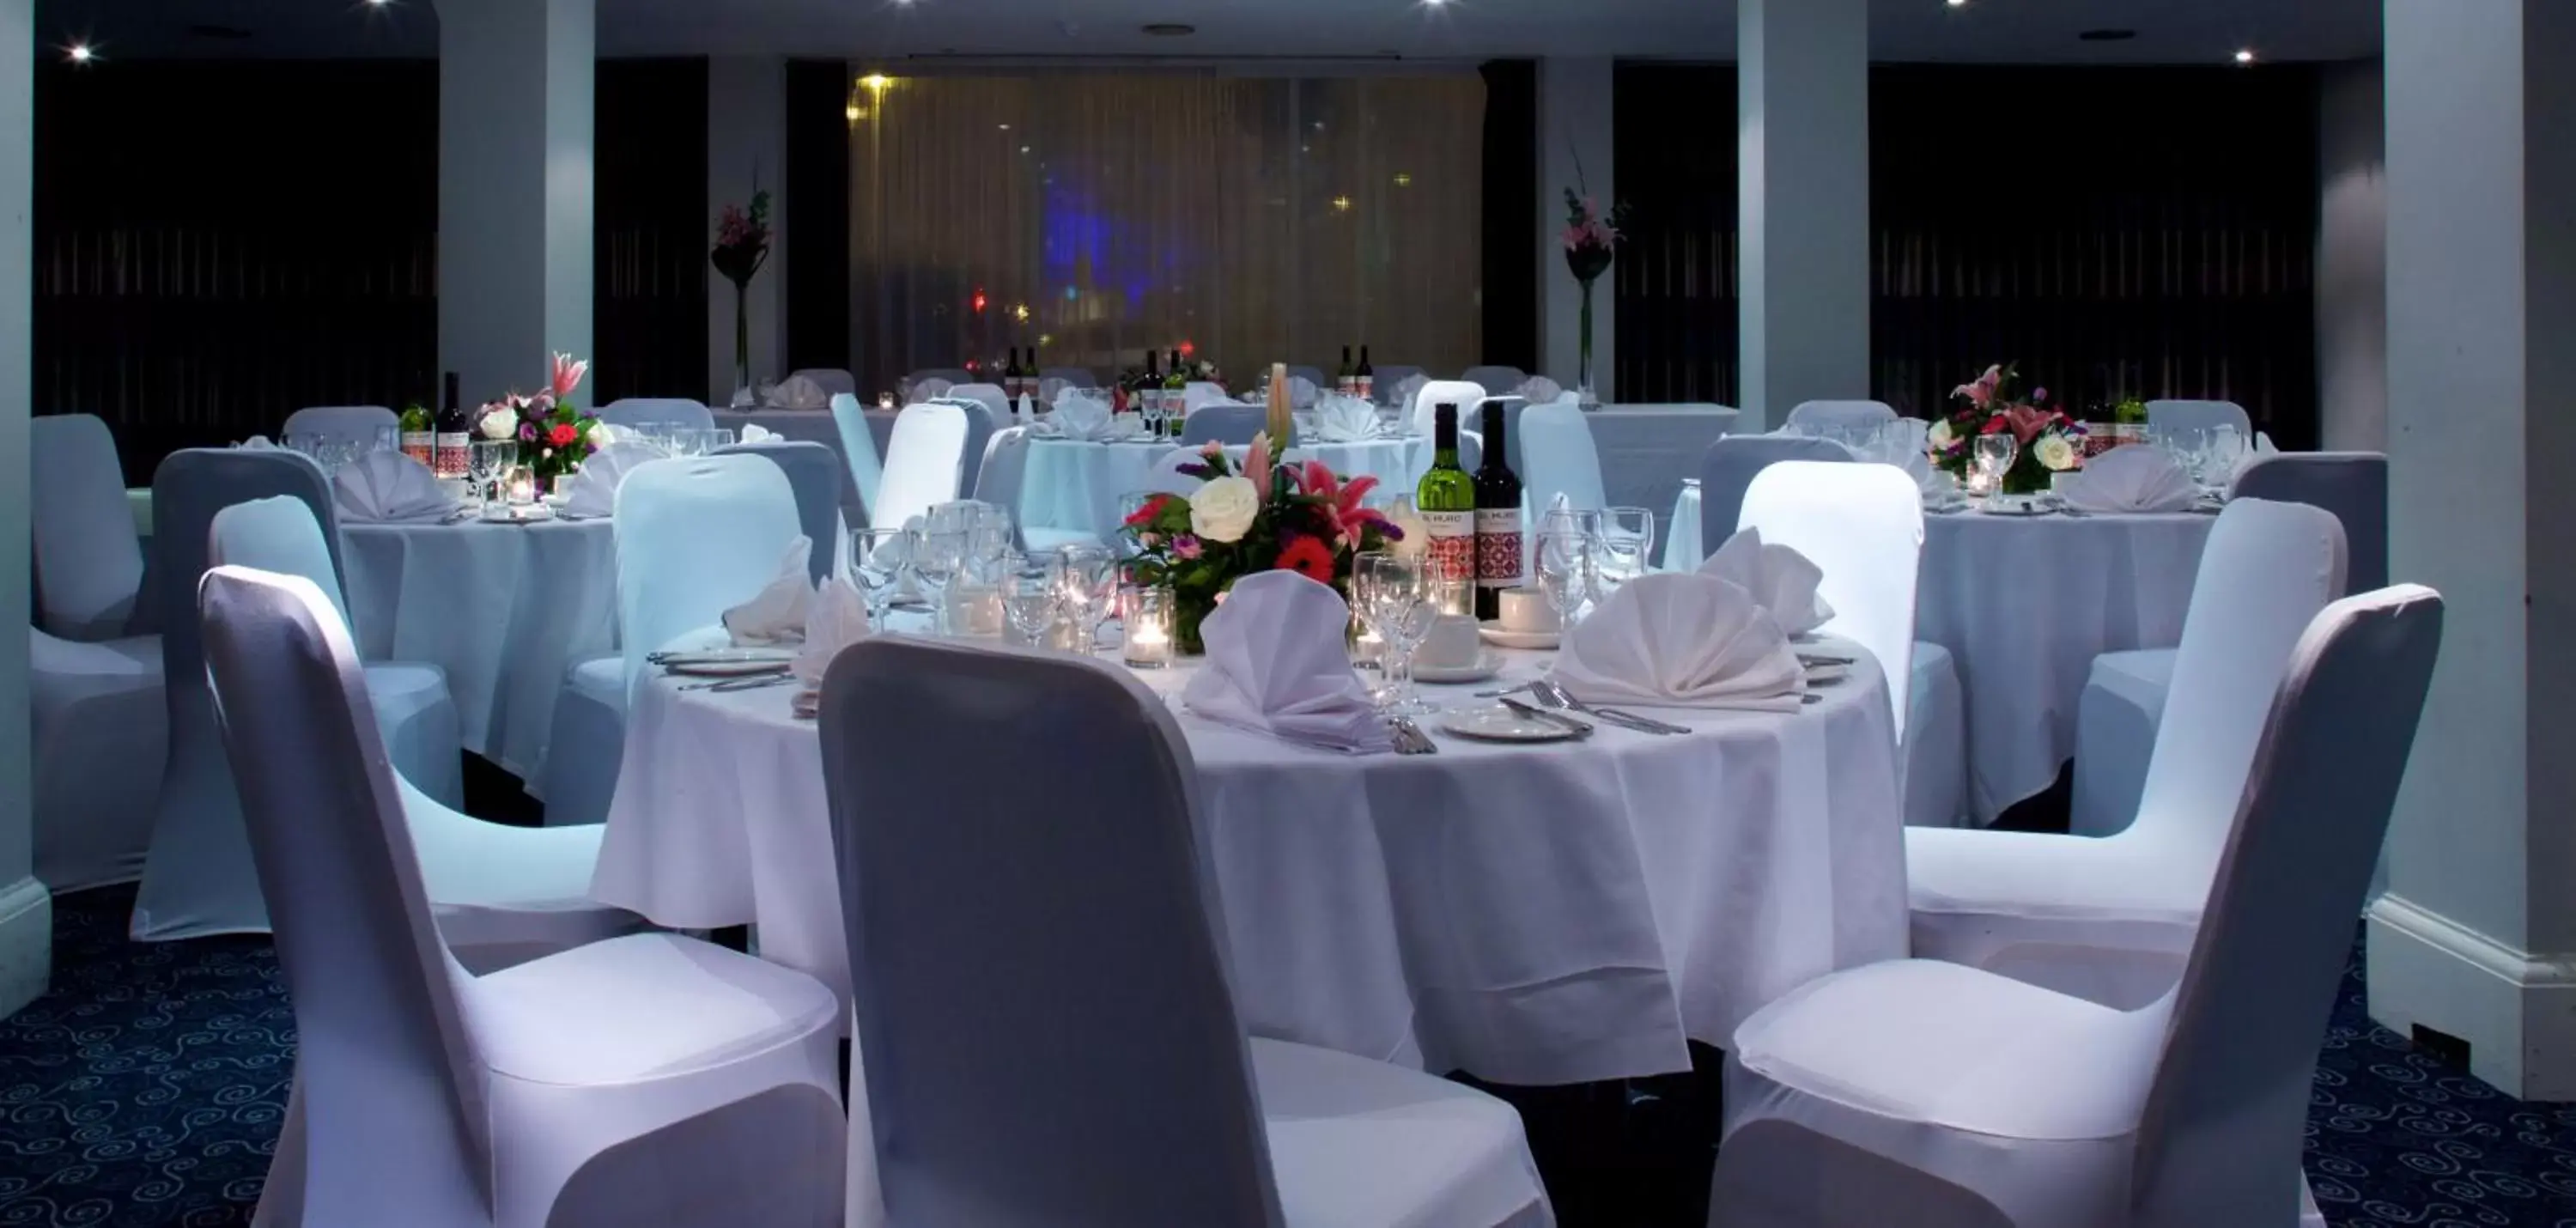 Food and drinks, Banquet Facilities in London Croydon Aerodrome Hotel, BW Signature Collection